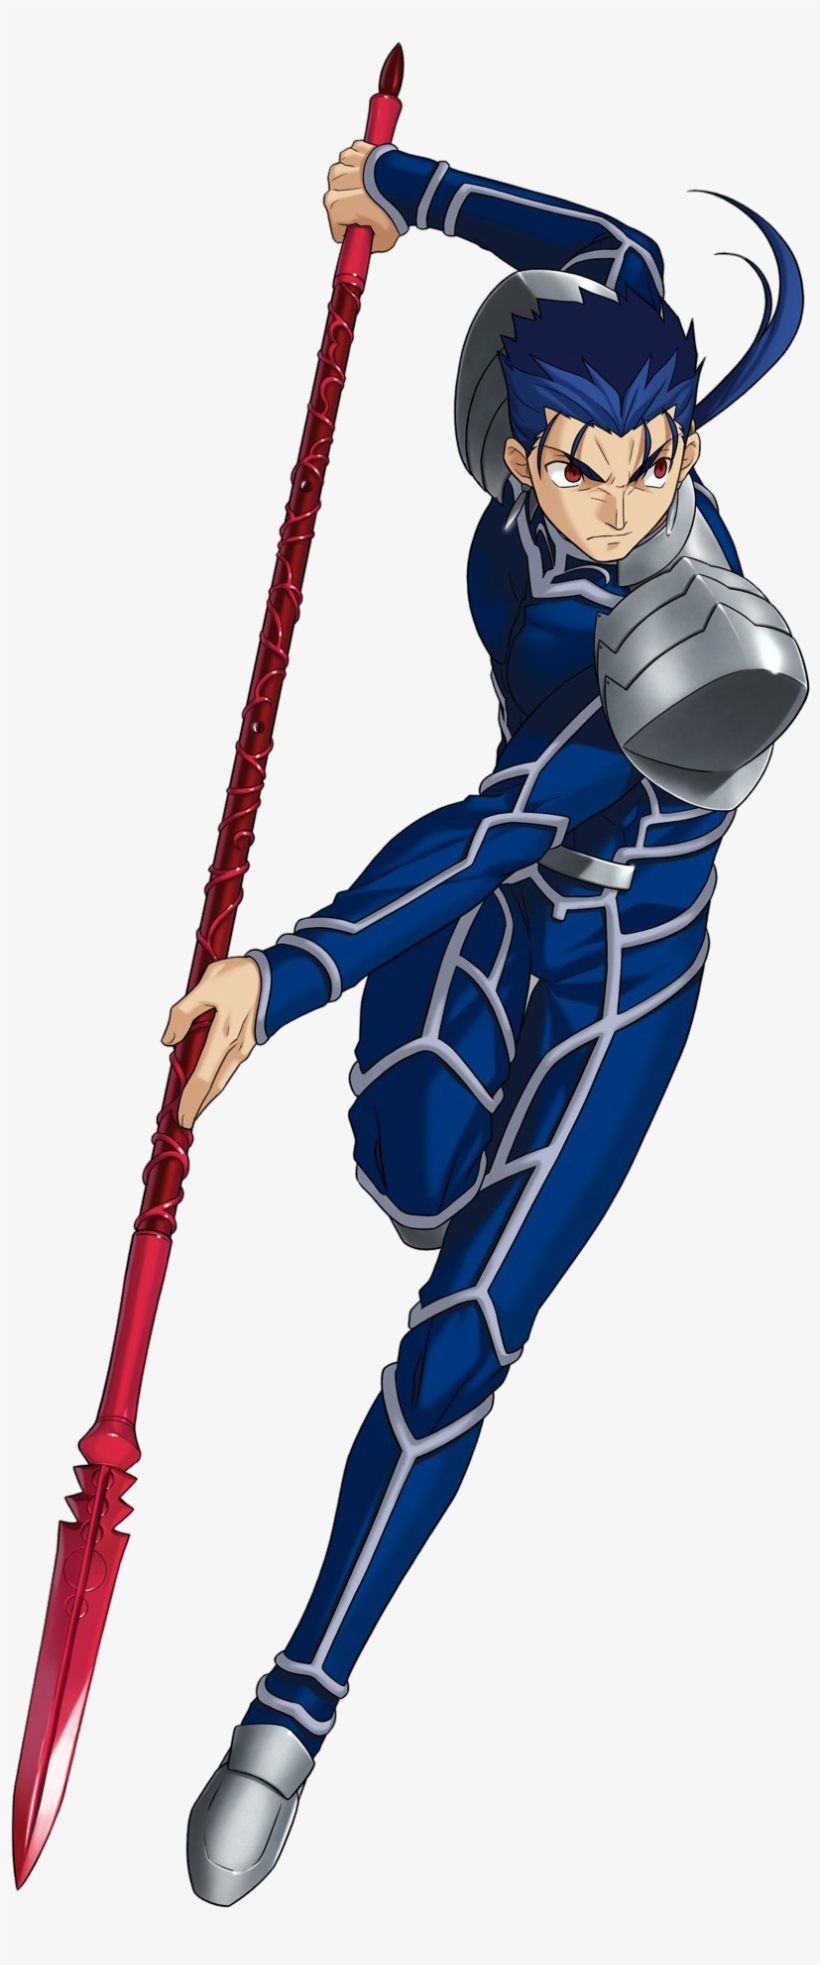 Appearance - Http - //img1 - Wikia - Nocookie - Net/ - Fate Stay Night Lancer Png, transparent png #5905274